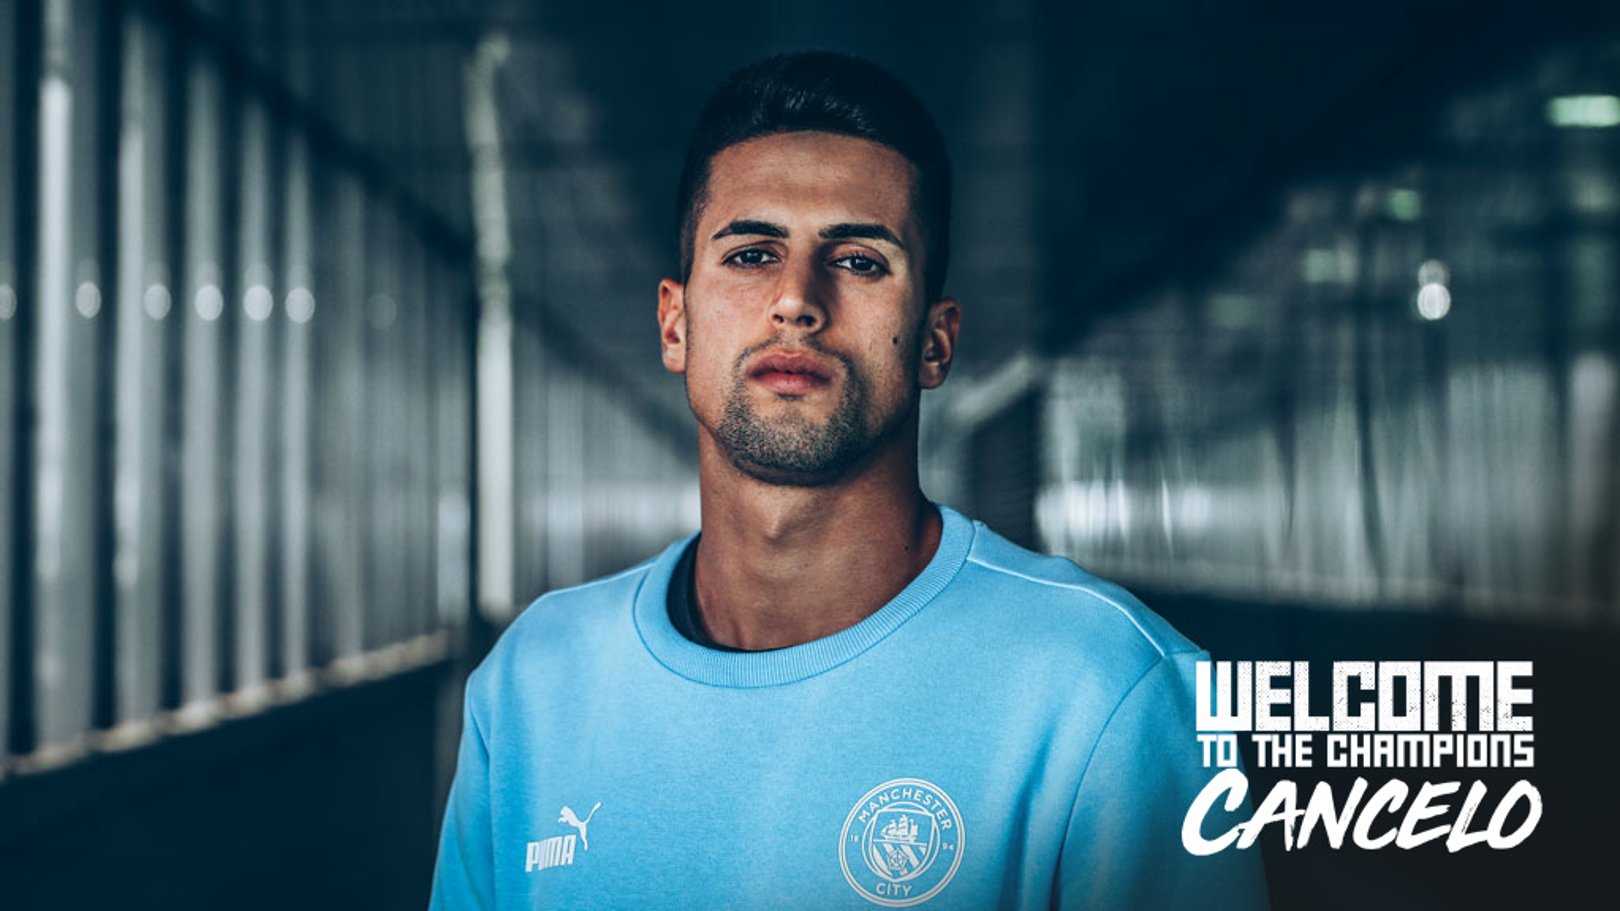 Why City style is perfect for Cancelo